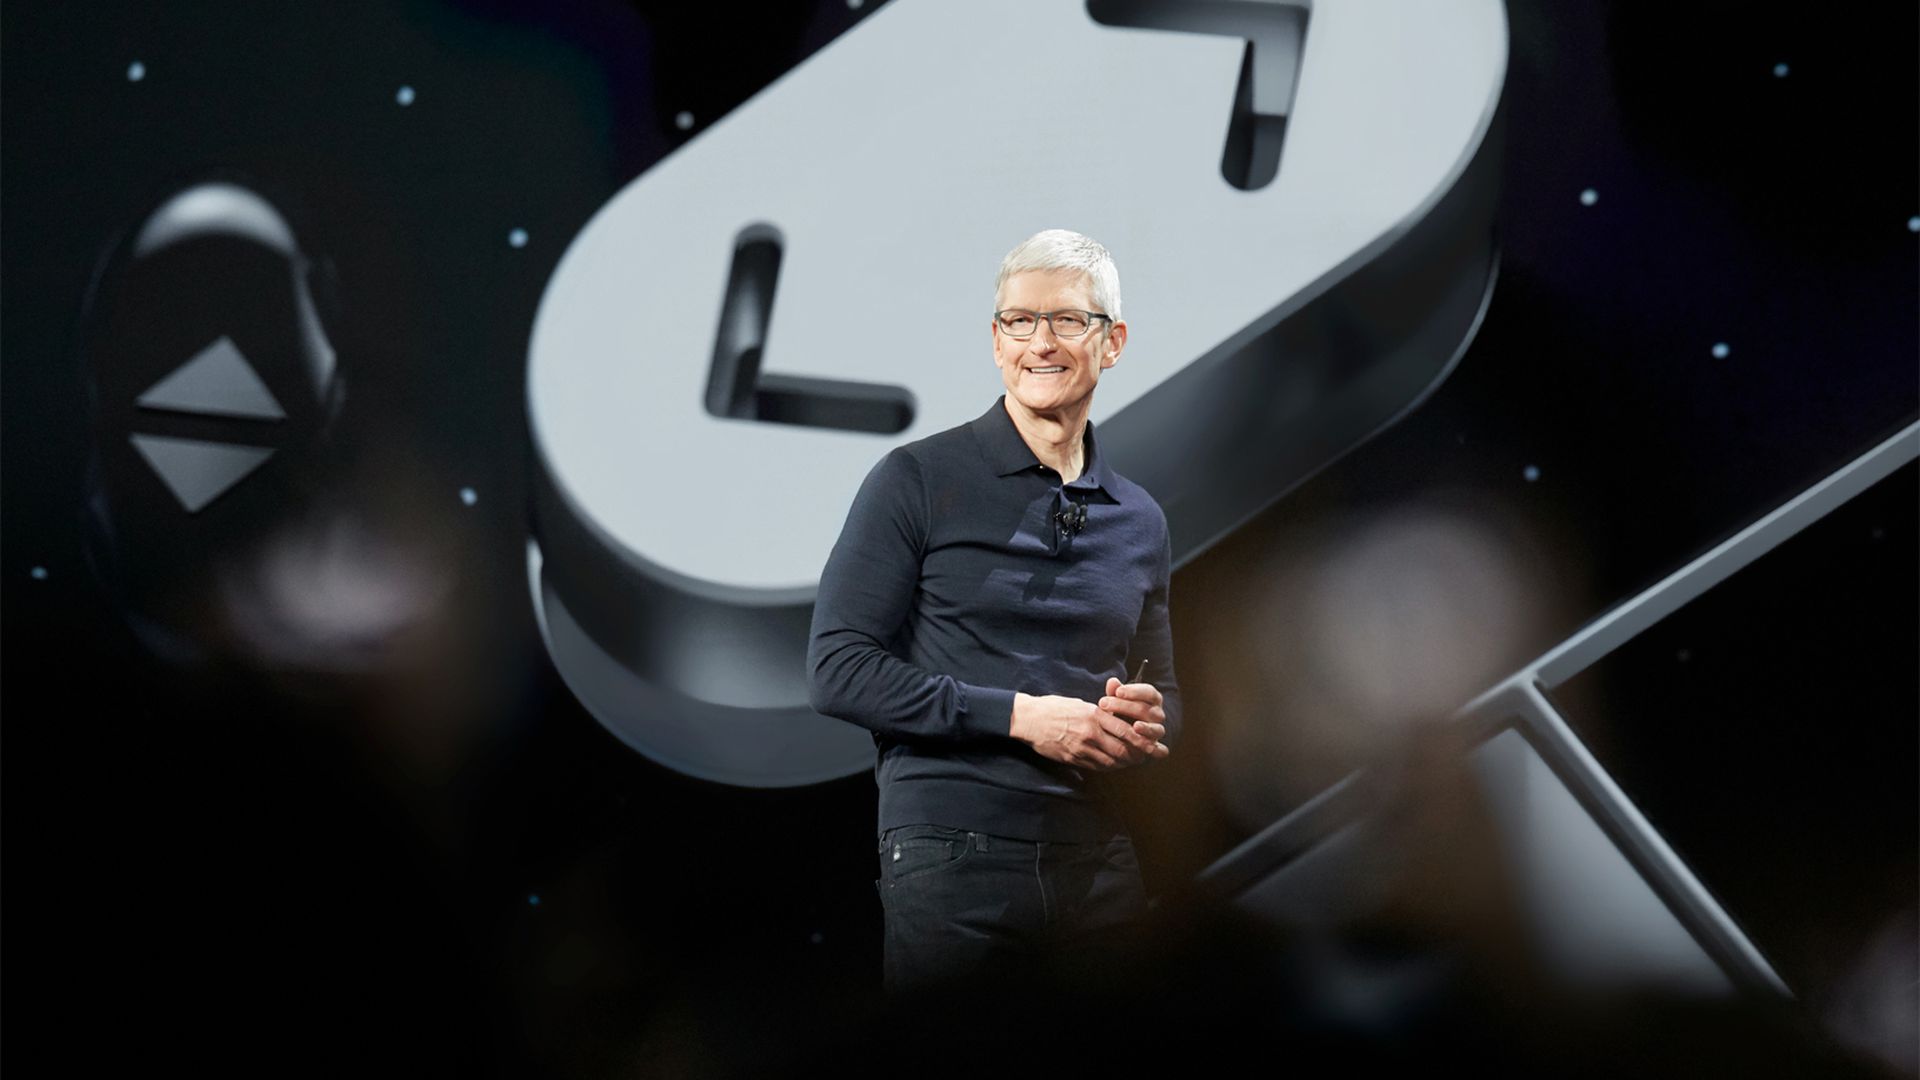 Apple CEO Tim Cook at WWDC 2018.